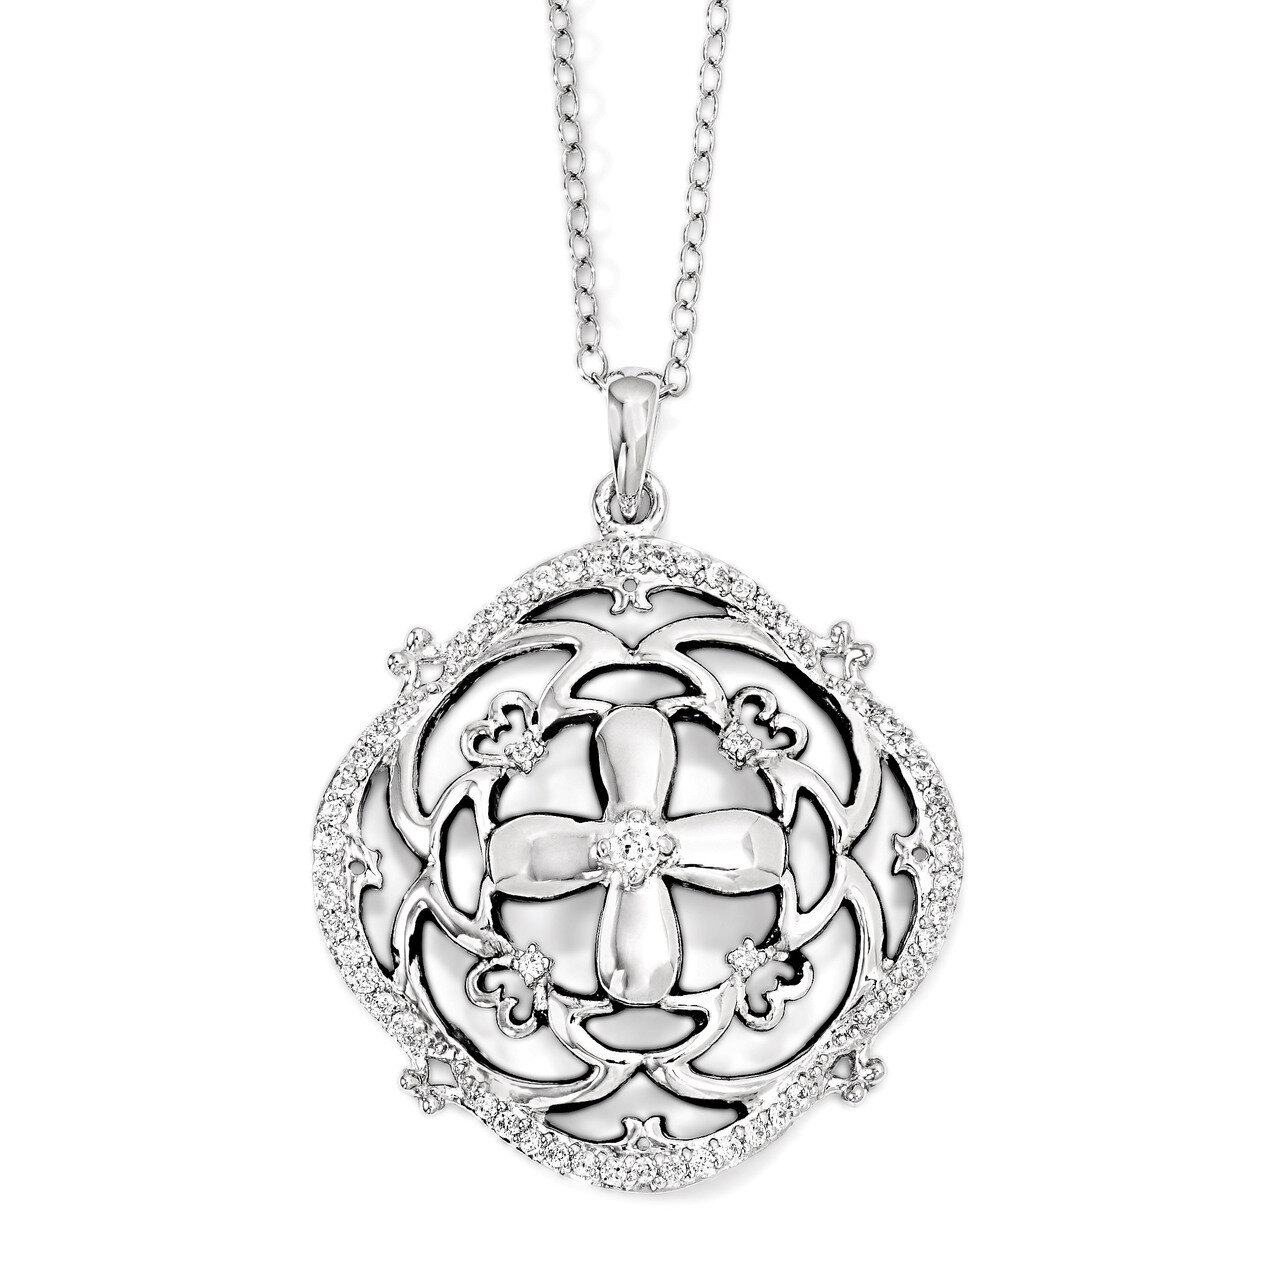 A Time For Miracles 18 Inch Necklace Sterling Silver with Diamonds QSX565